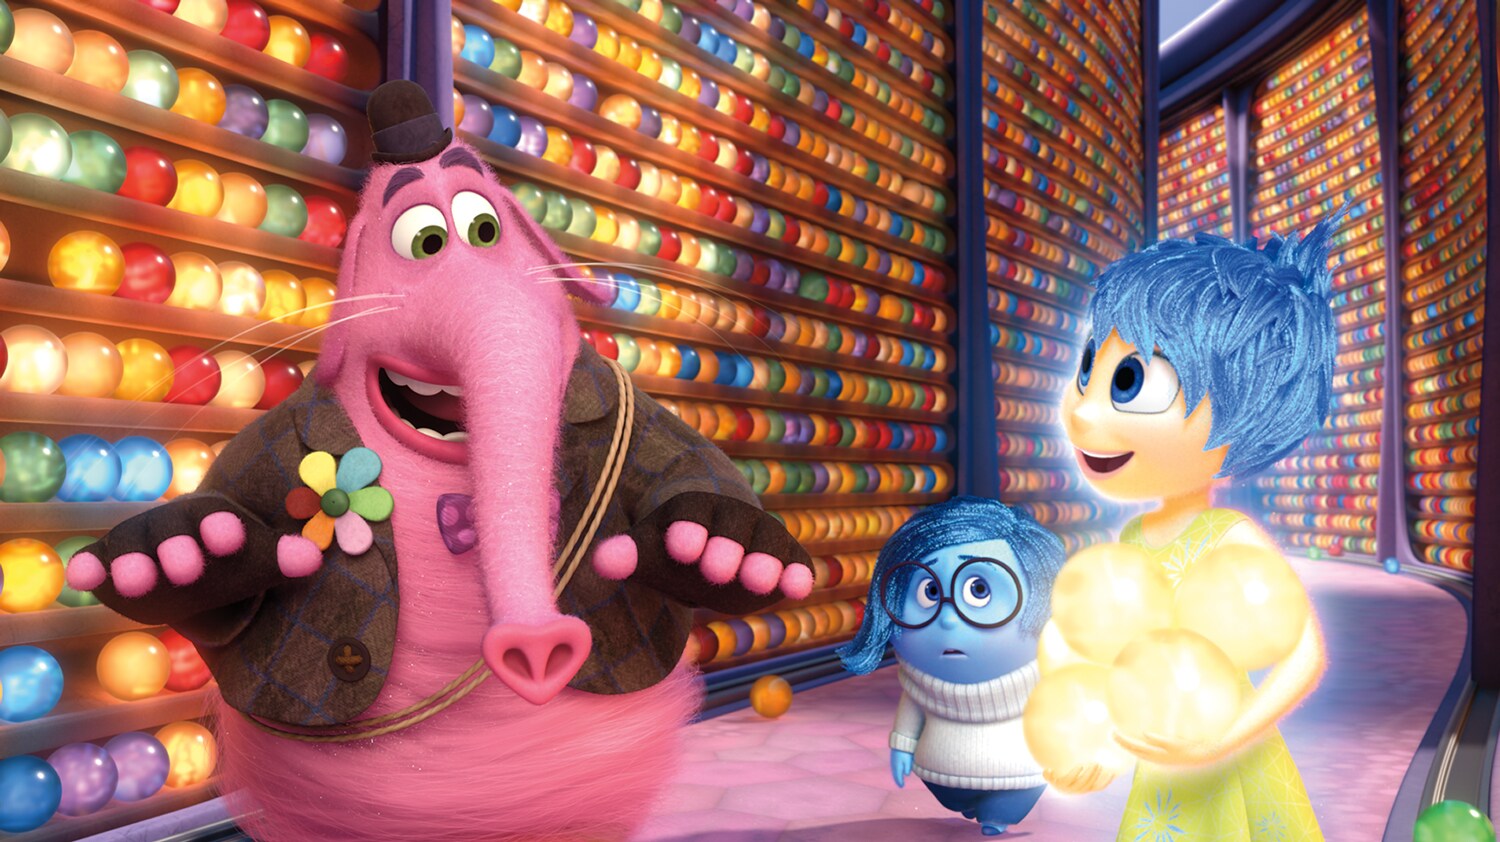 Actors Richard Kind as Bing Bong, Phyllis Smith as Sadness, and Amy Poehler as Joy in the movie Inside Out